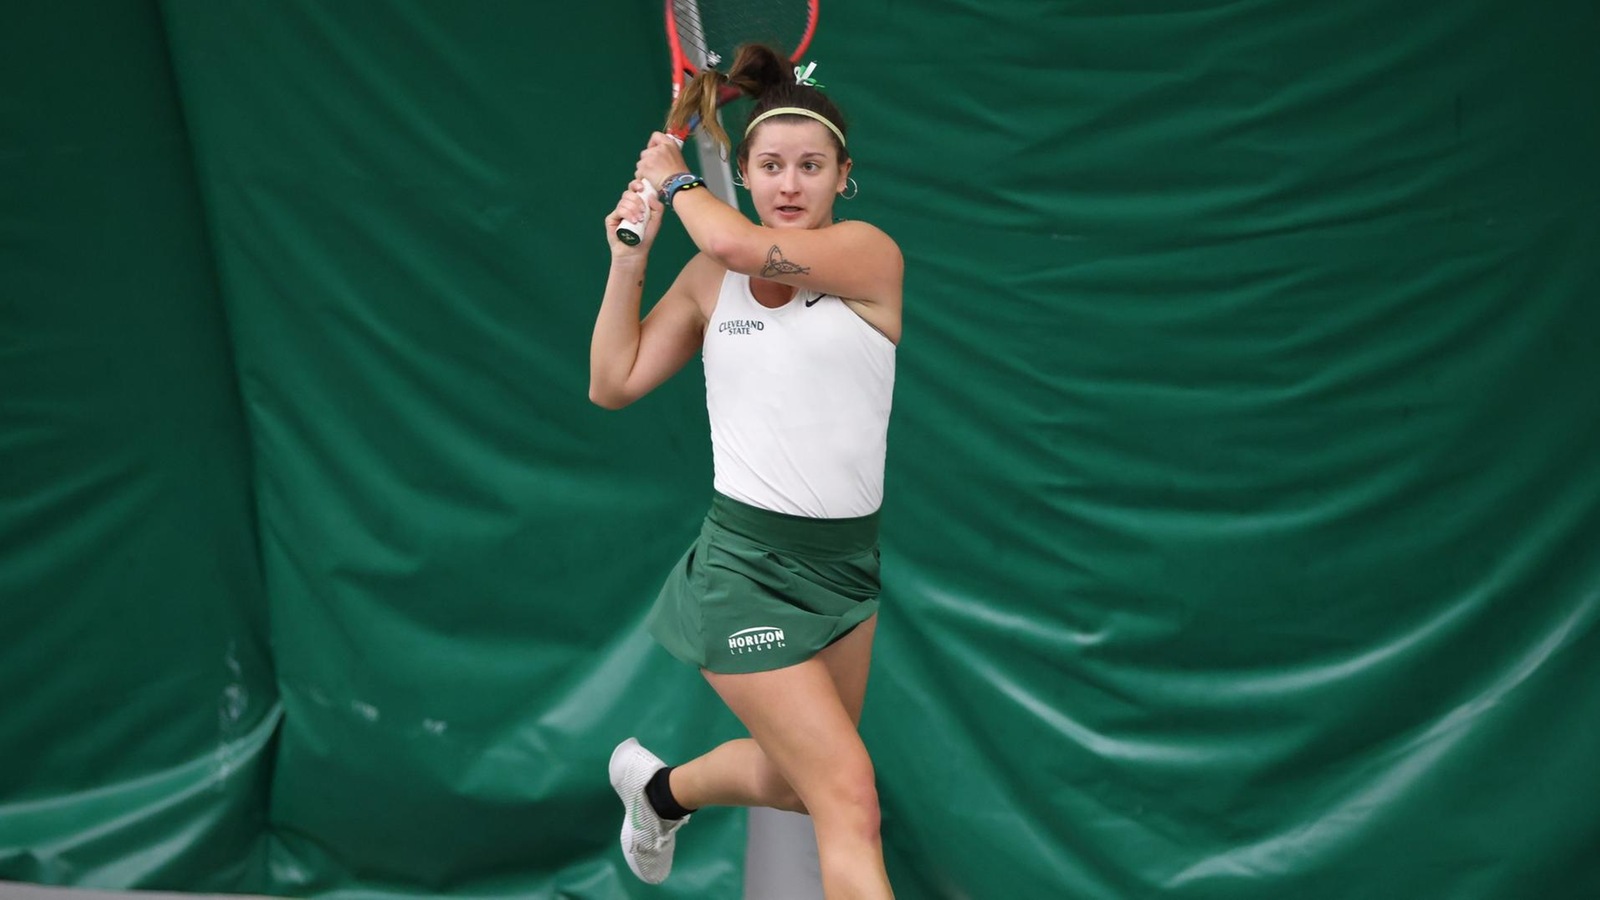 Cleveland State Women’s Tennis Sweeps #HLTennis Weekly Awards For Sixth Time